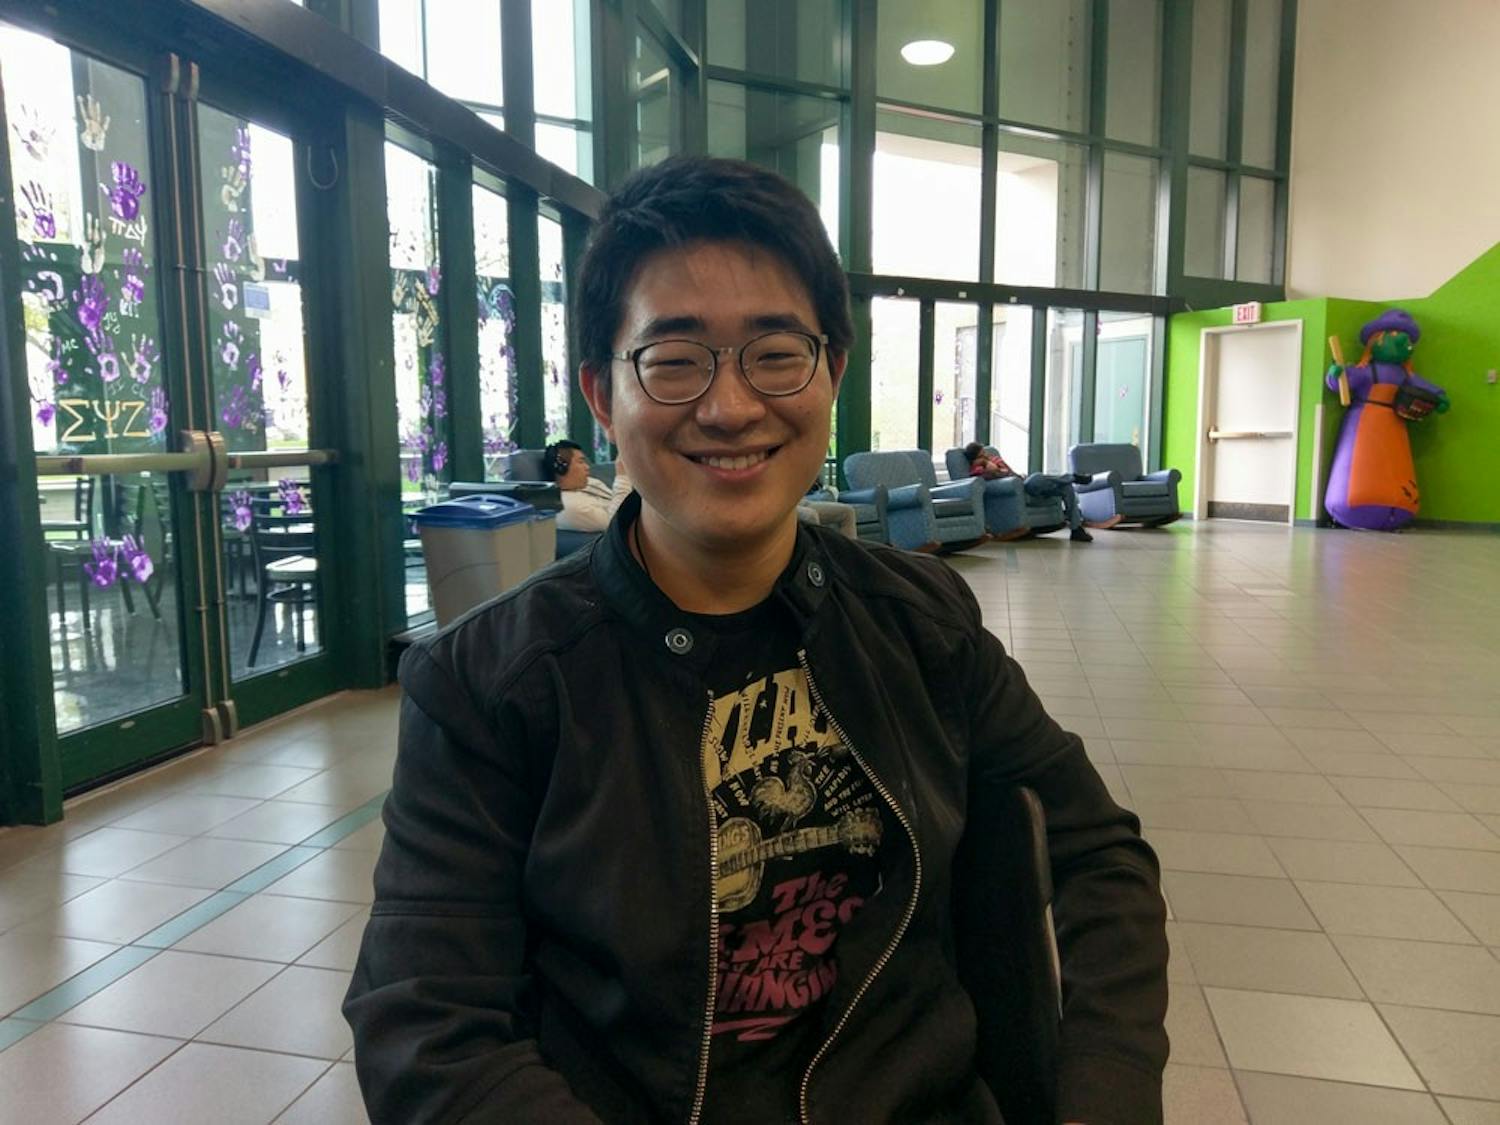 Hosoo Kim, a junior international student from South Korea, has lived in the U.S. for three years now, but feels his voice in the presidential election does not matter.&nbsp;